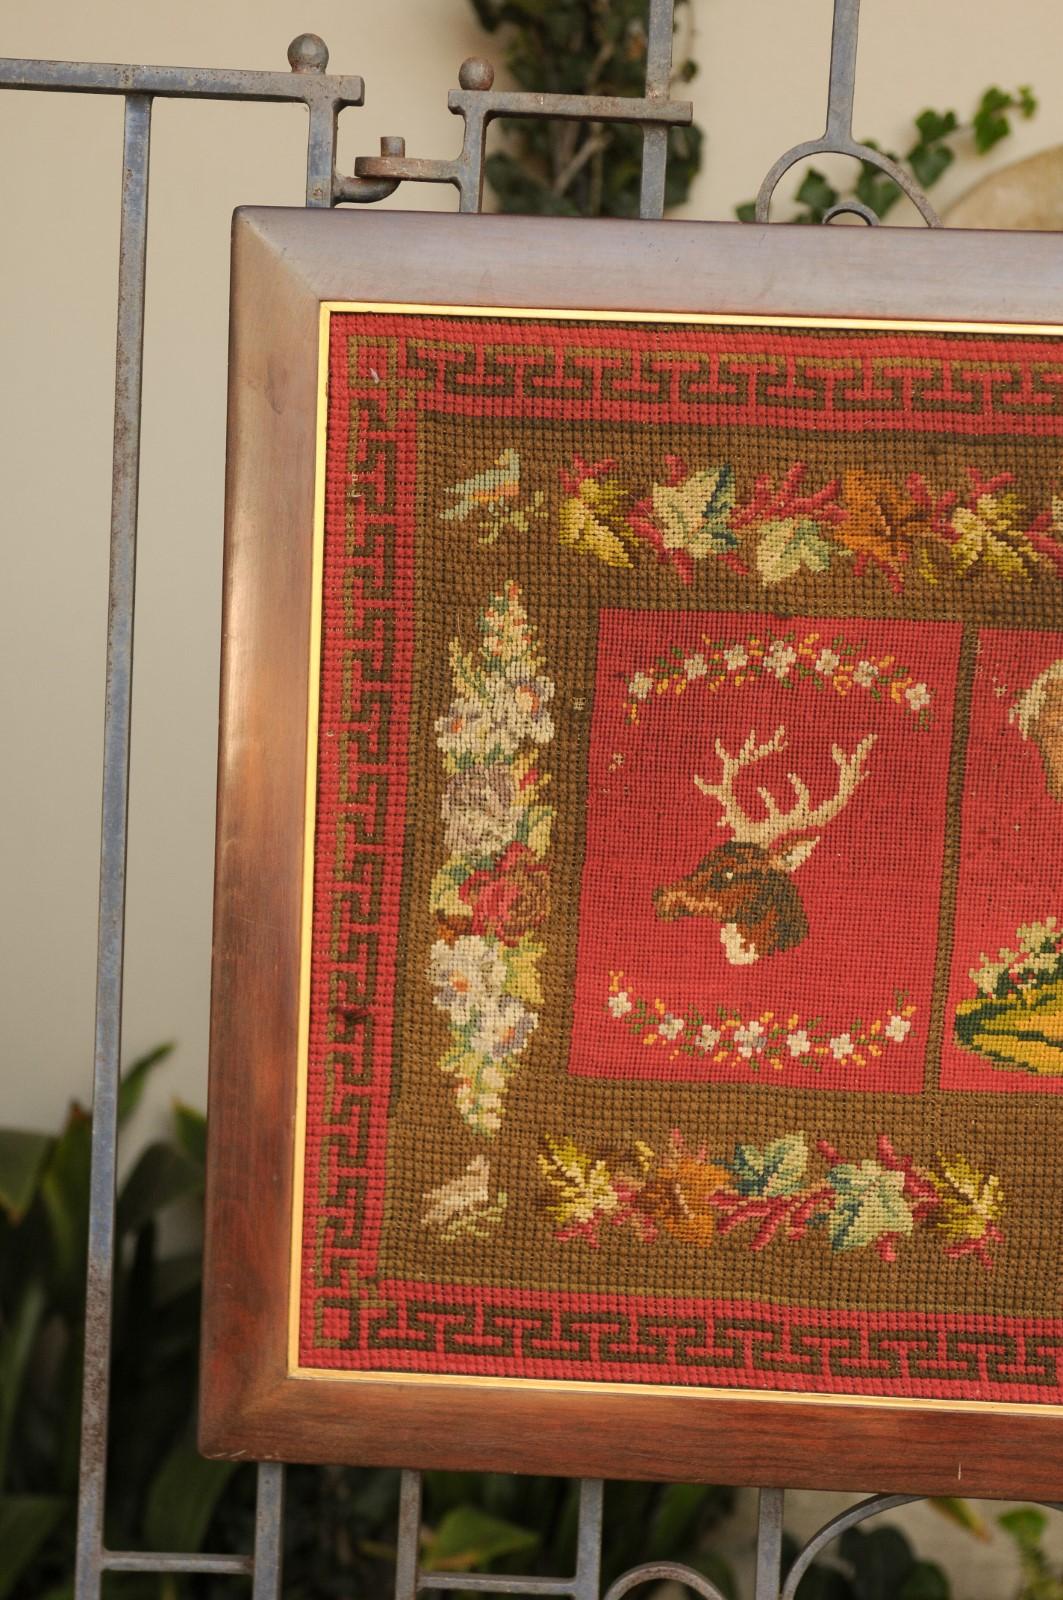 19th Century Framed English Red Needlework Tapestry Dated 1871 with Animals and Greek Key